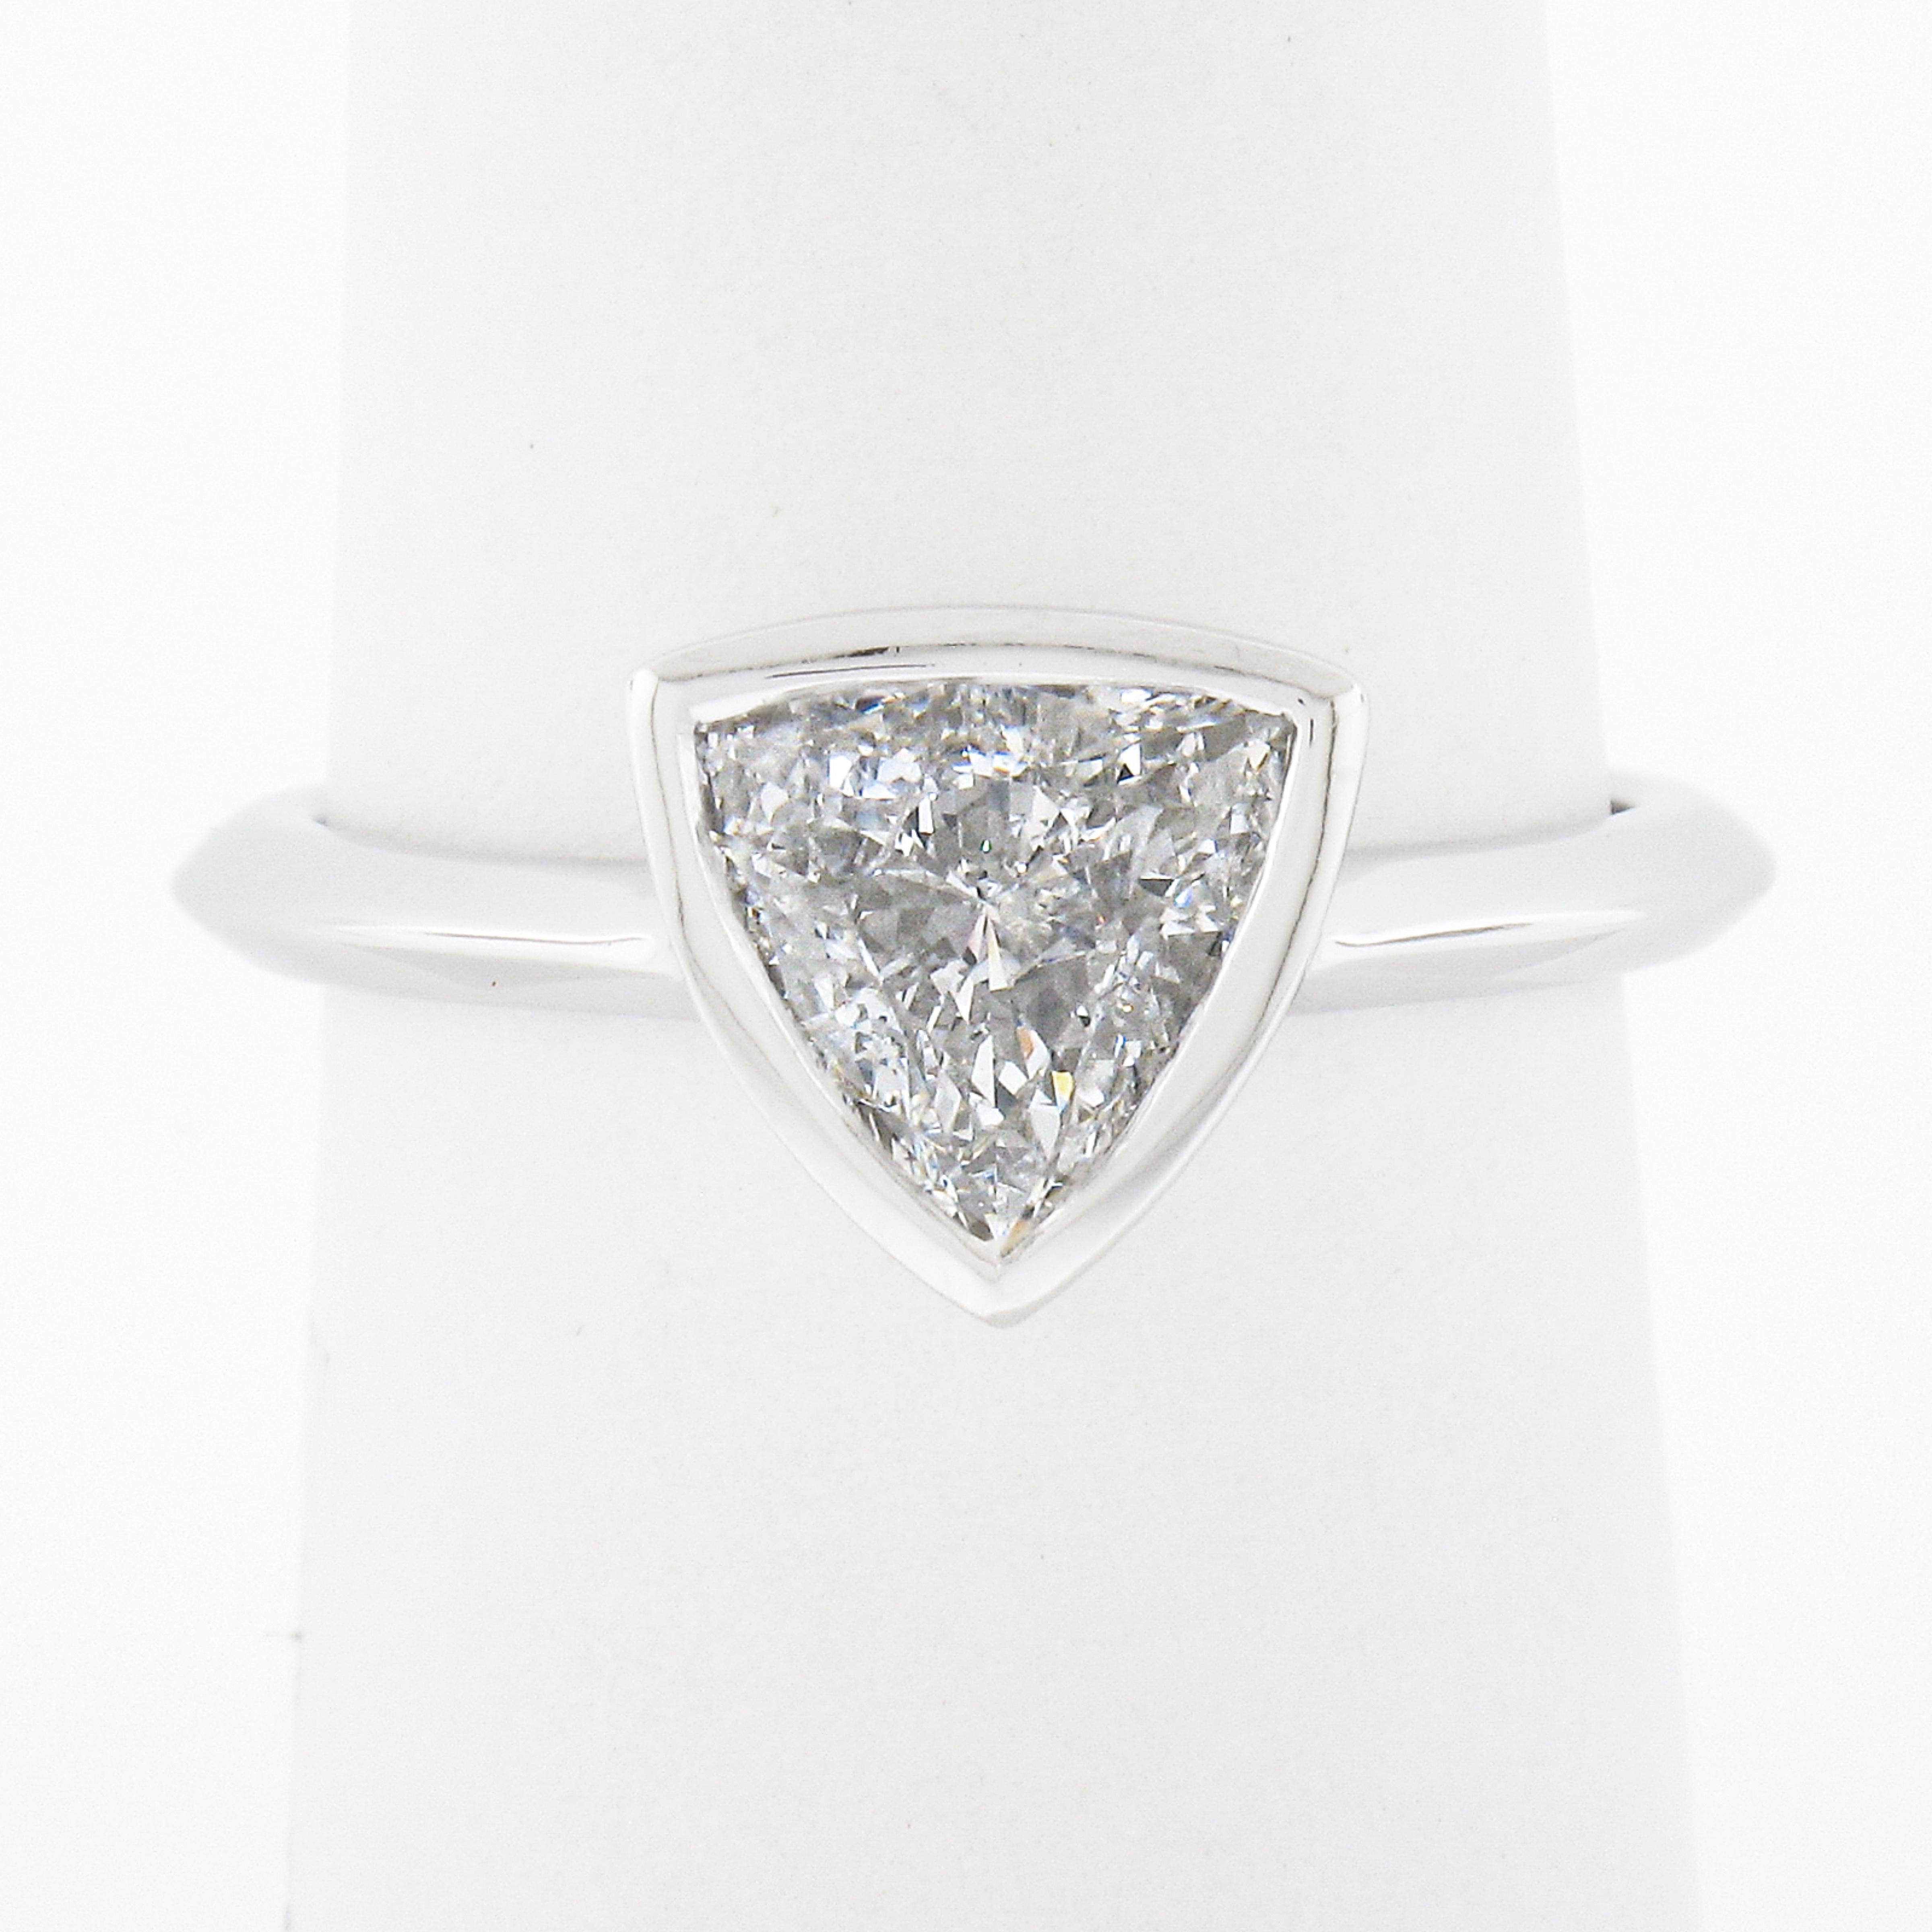 Here we have a simple, yet absolutely gorgeous, diamond solitaire ring that is newly crafted from solid platinum. The GIA certified solitaire has an amazing trillion cut and is neatly bezel set at the center of the ring, weighing exactly 1.01